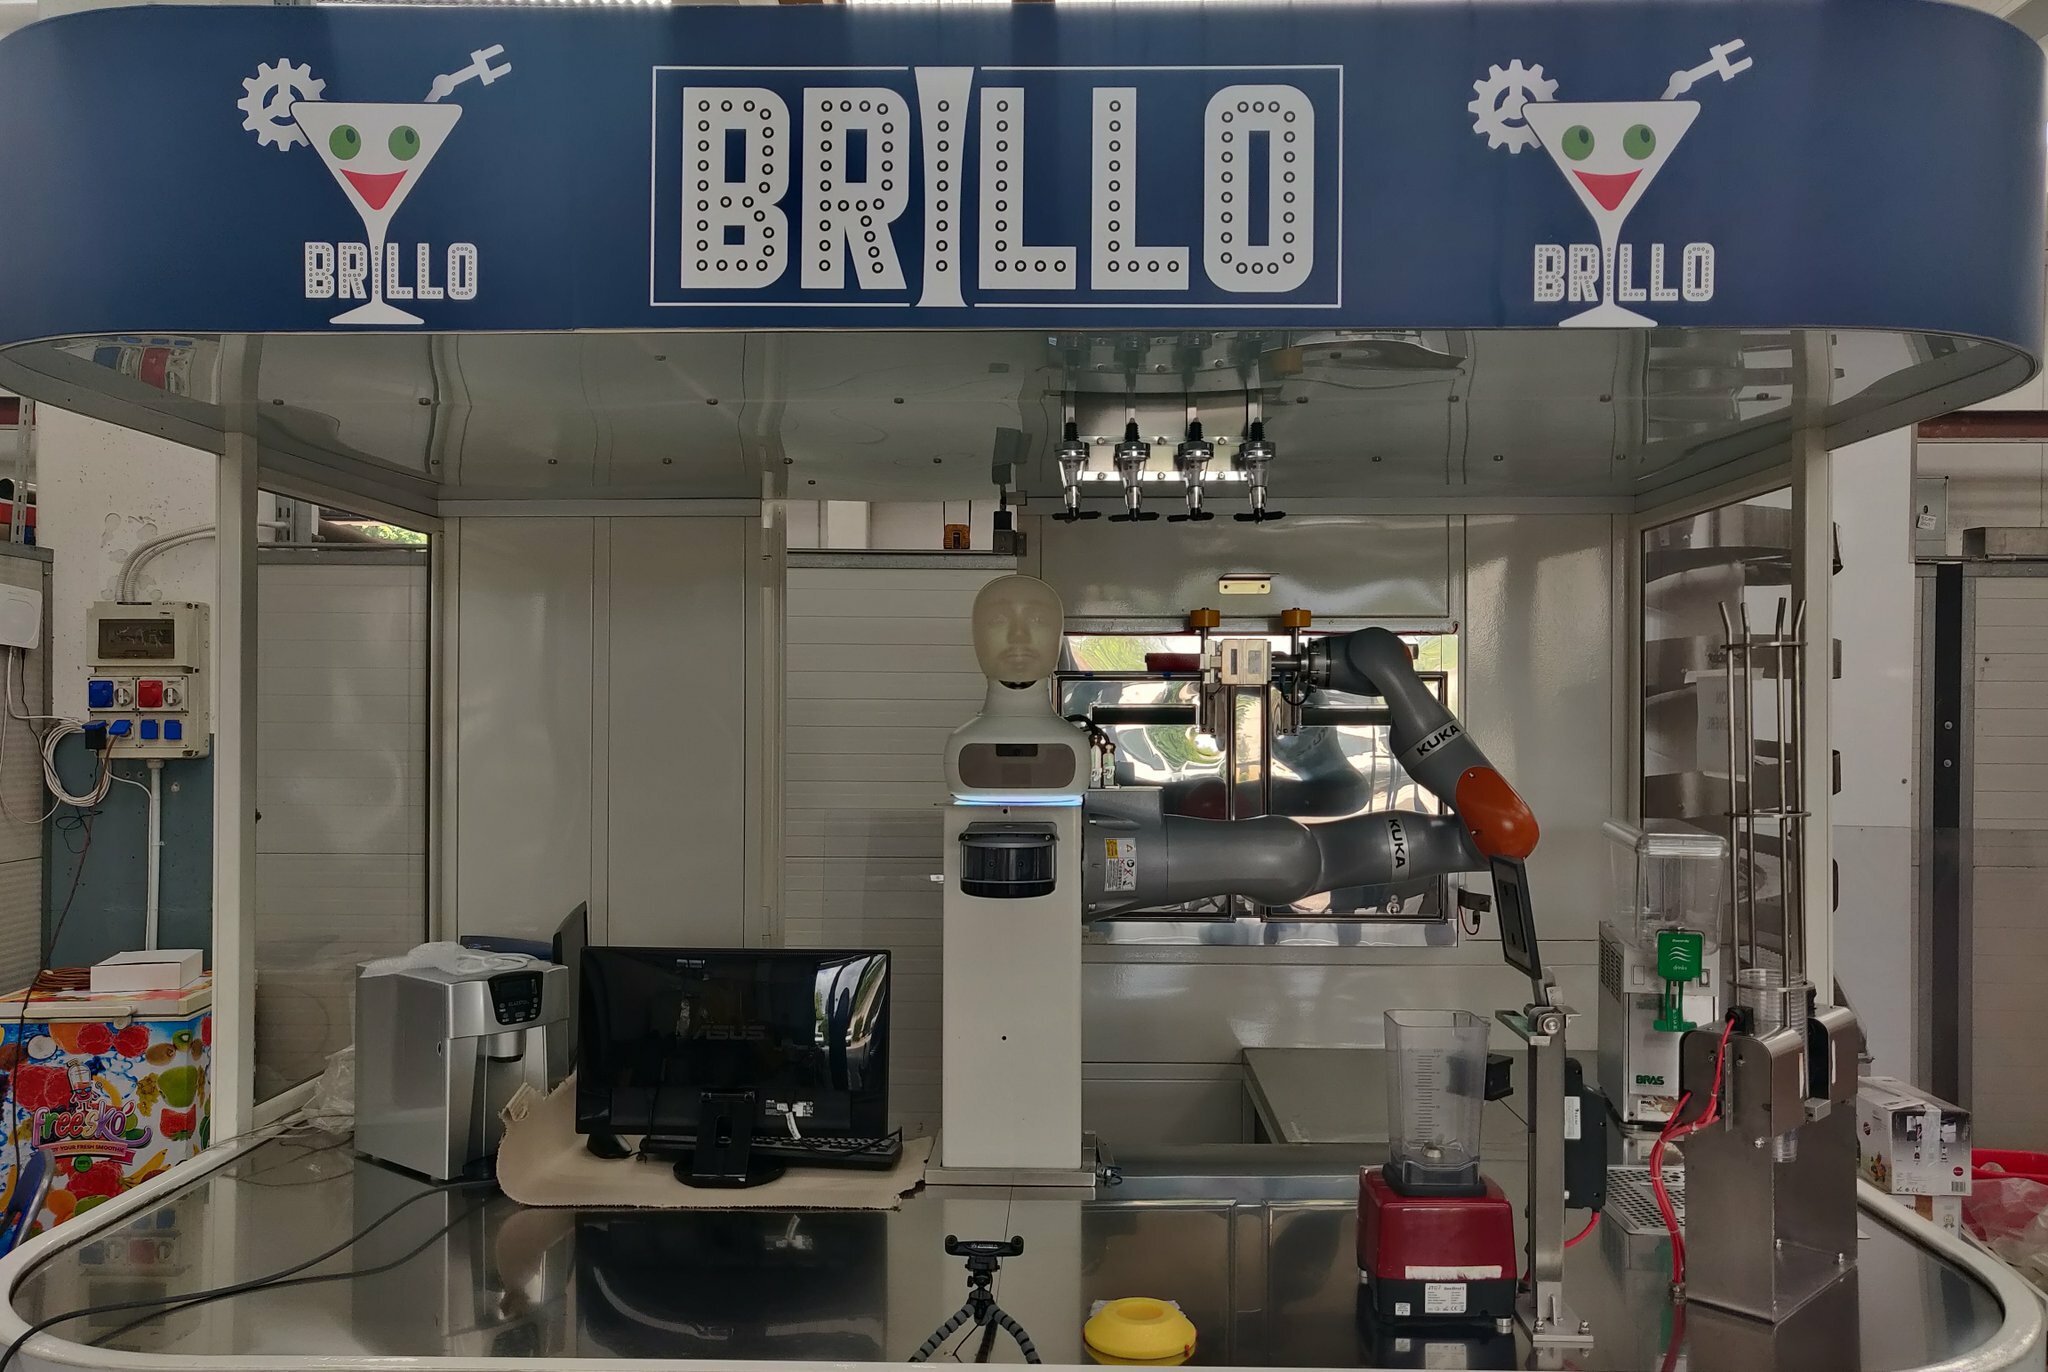 BRILLO the Italian robot bartender in the early stages of development